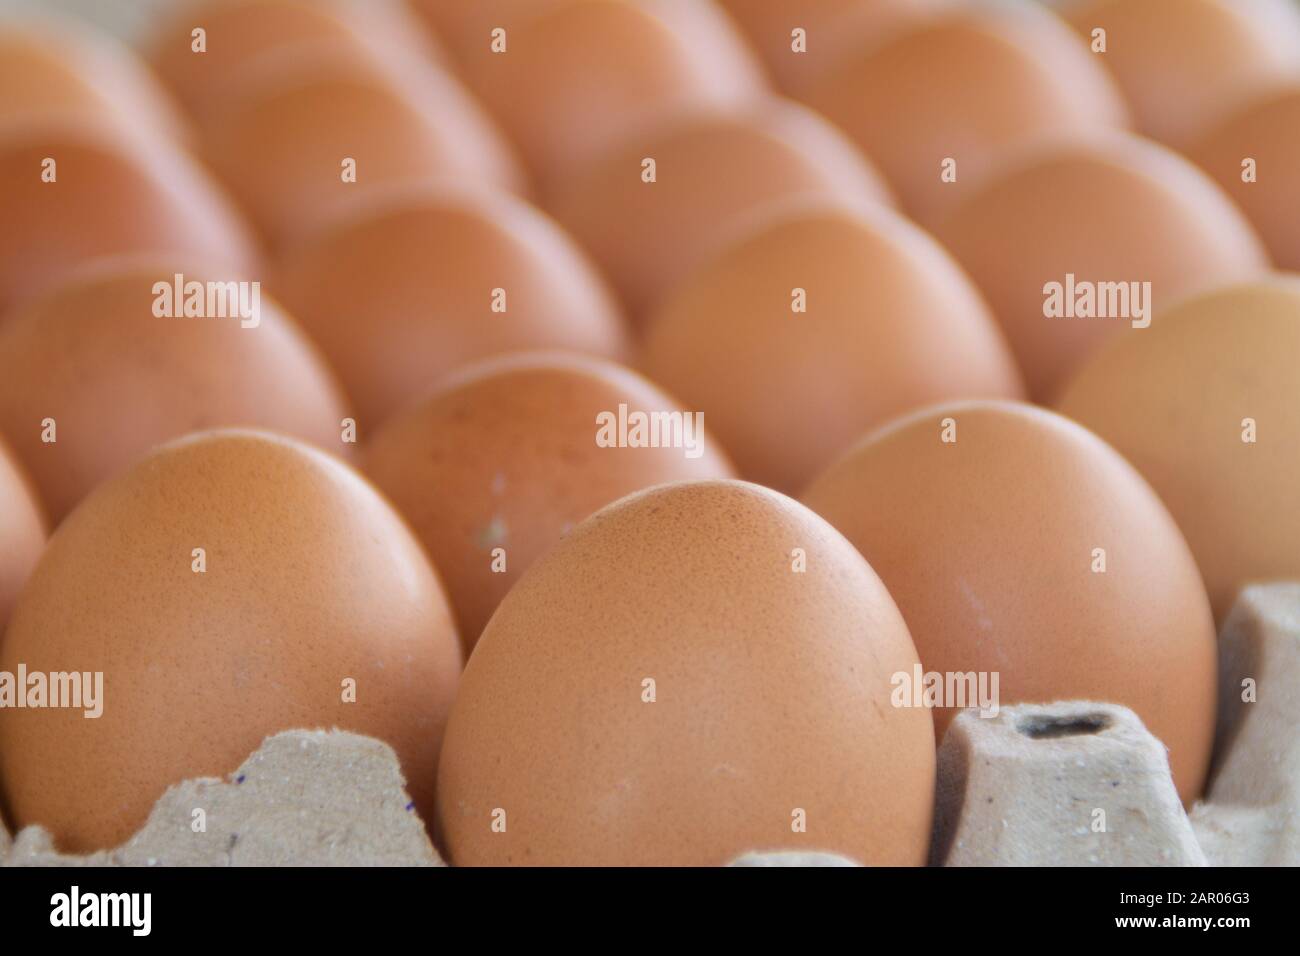 Brown chicken eggs are in the tray for sale in the market. Eggs are good protein. The eggs are arranged in a tray of the same size. Stock Photo